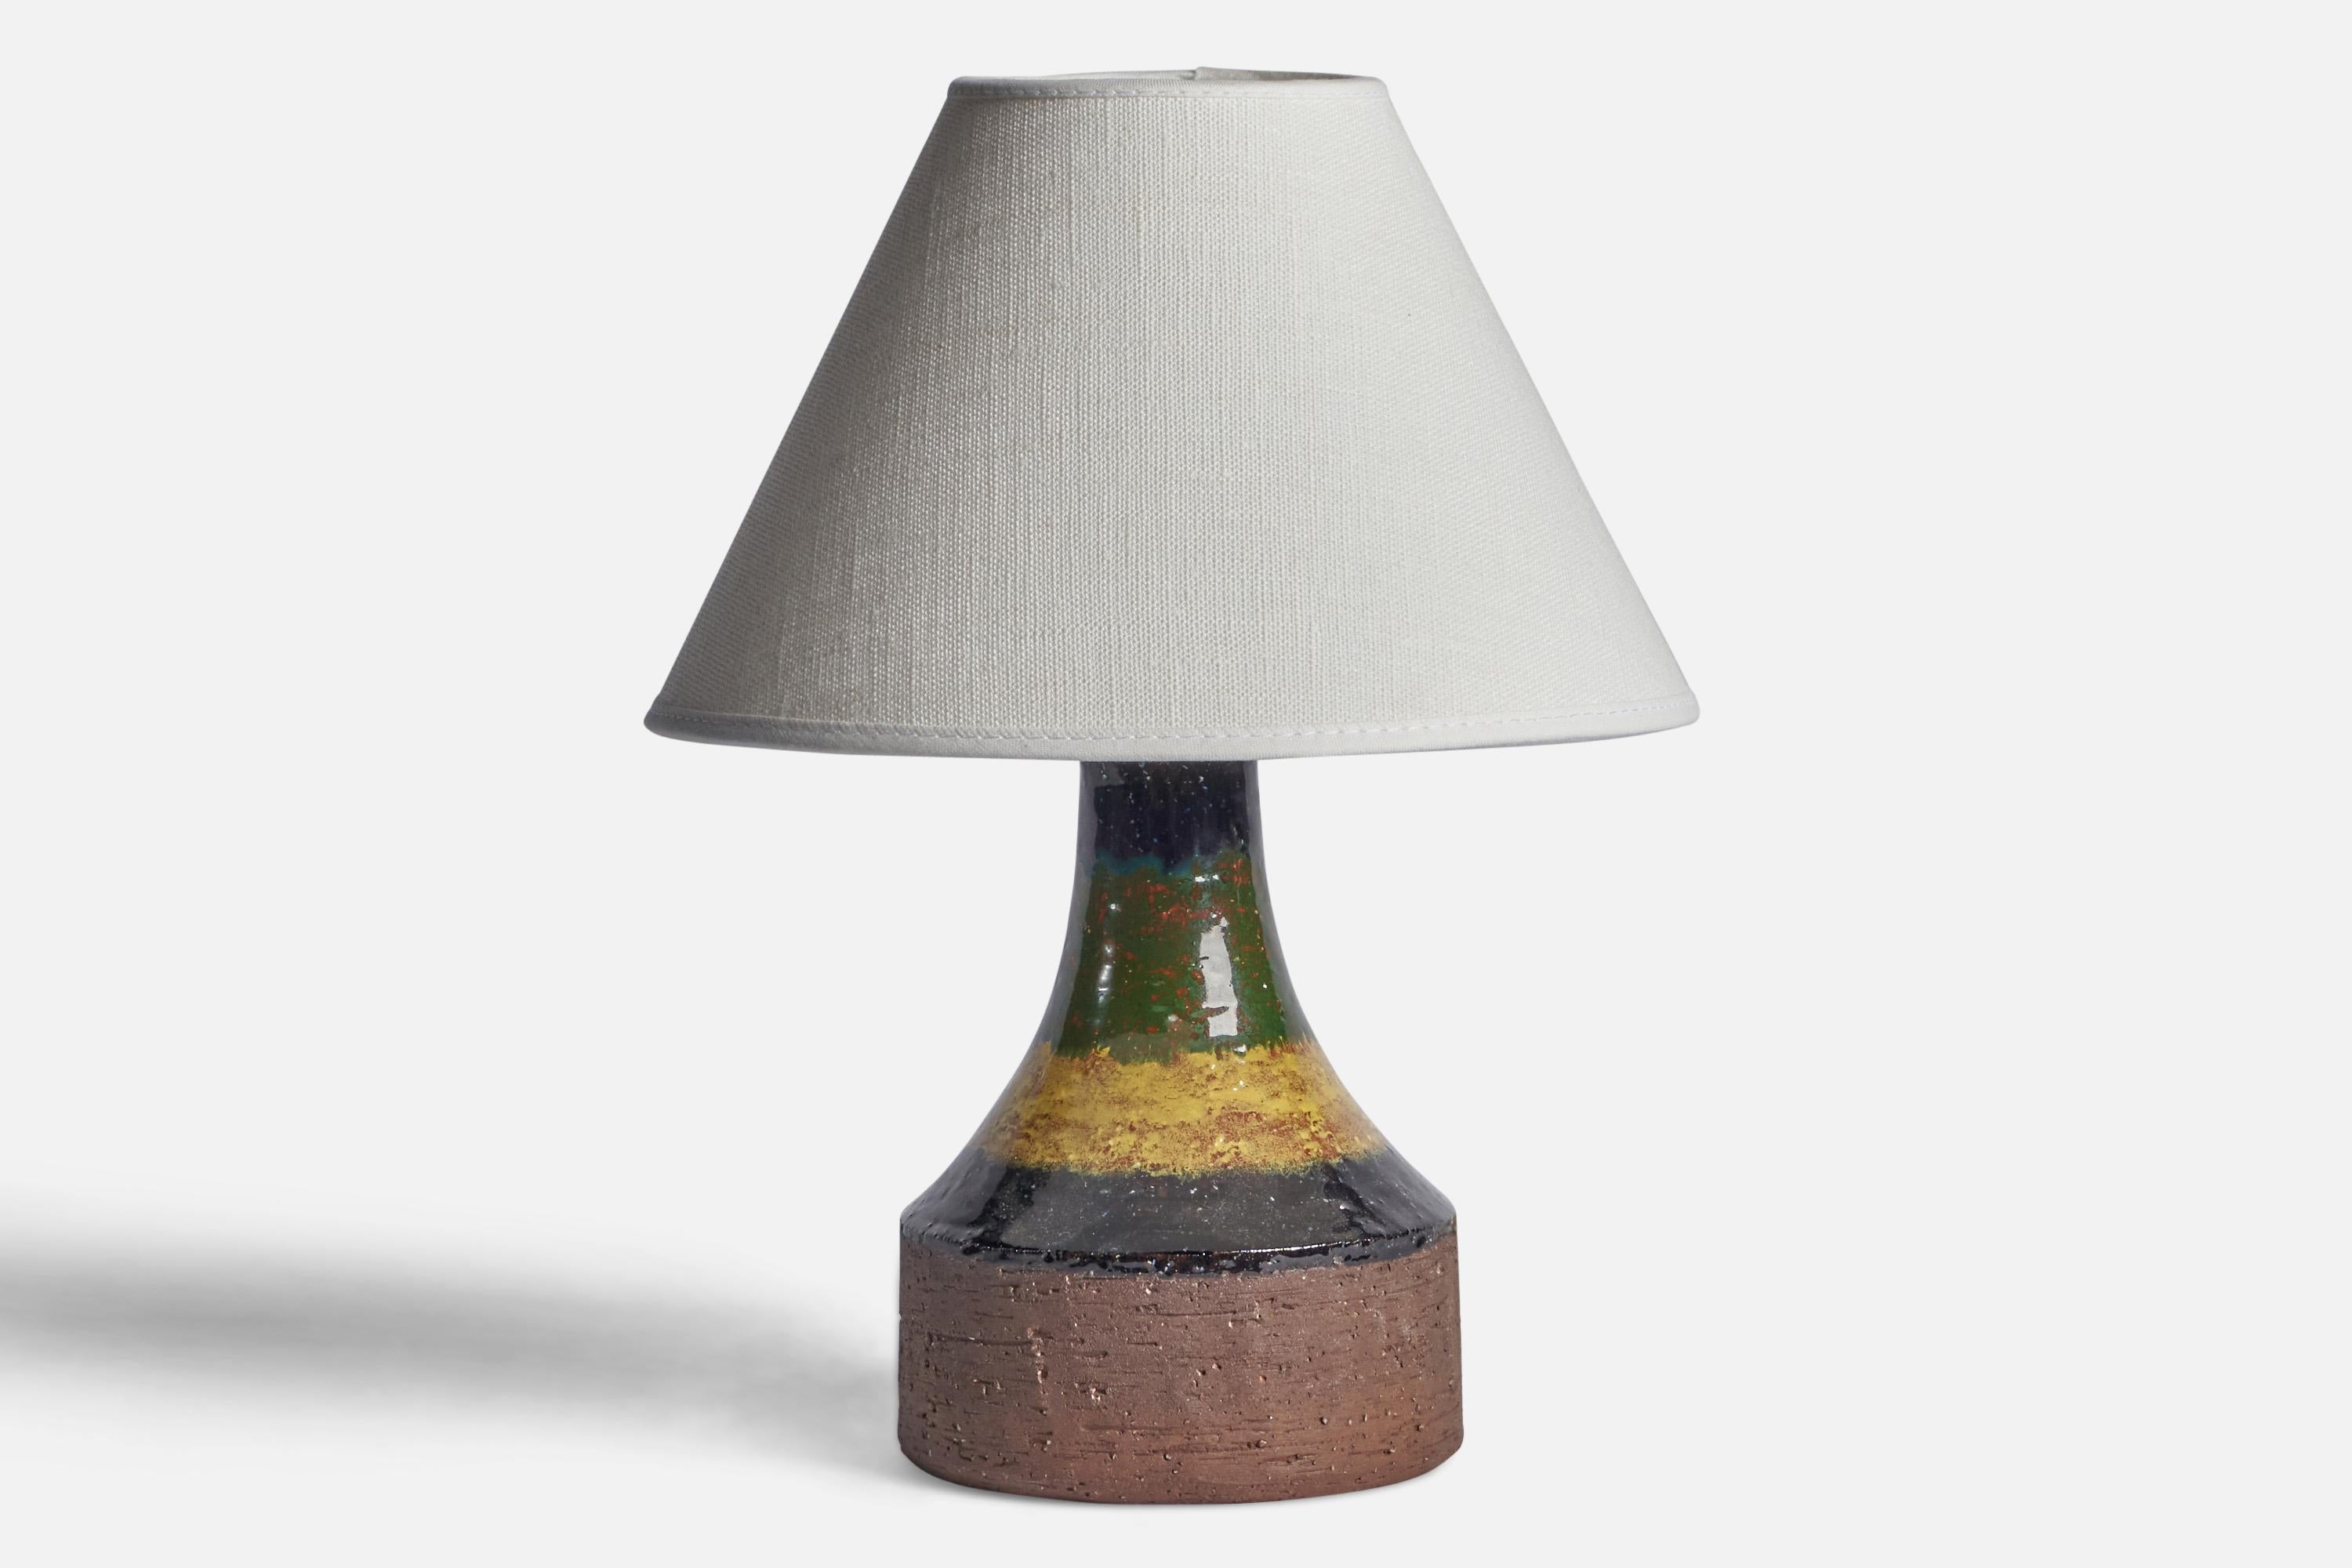 A small black and yellow-glazed stoneware table lamp designed and produced by Laholm Keramik, Sweden, c. 1960s.

Dimensions of Lamp (inches): 8” H x 4.3” Diameter
Dimensions of Shade (inches): 3” Top Diameter x 8” Bottom Diameter x 5” H 
Dimensions